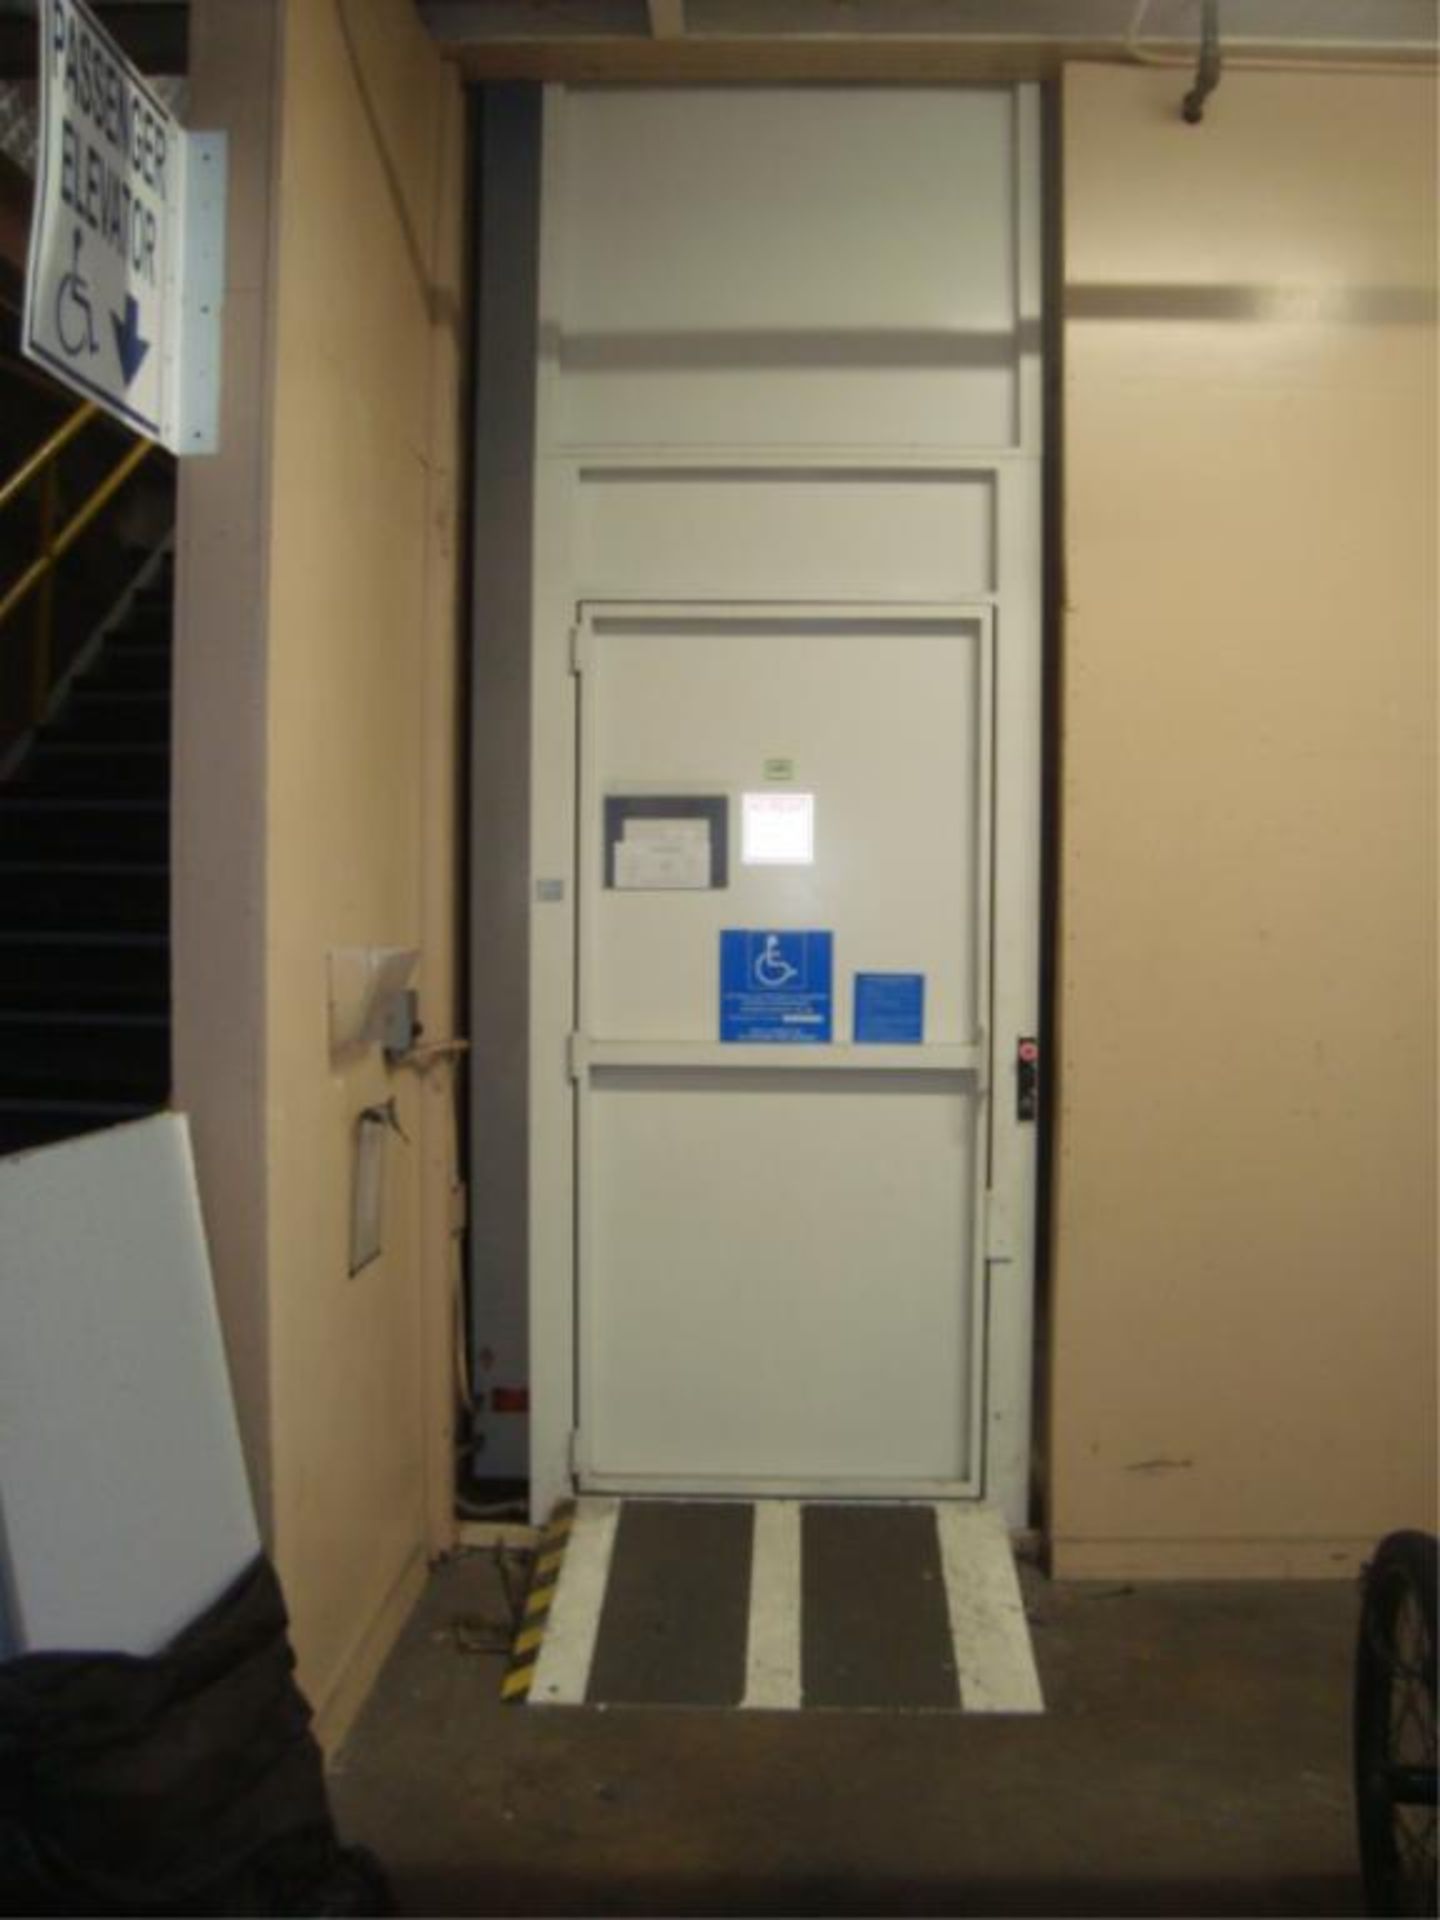 Wheel Chair Access Elevator - Image 16 of 16